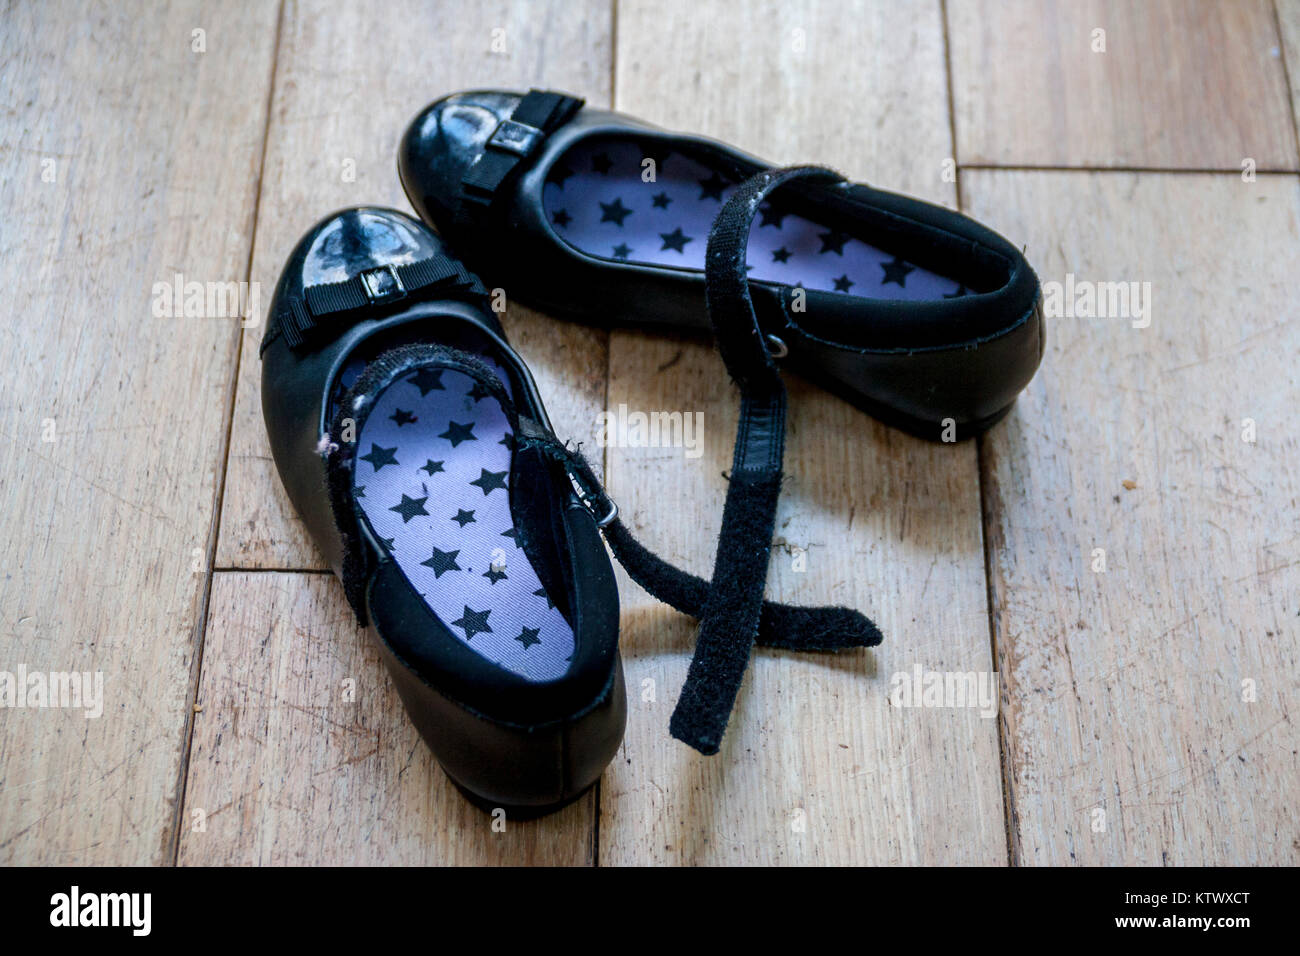 childrens black patent leather clark's shoes Stock Photo